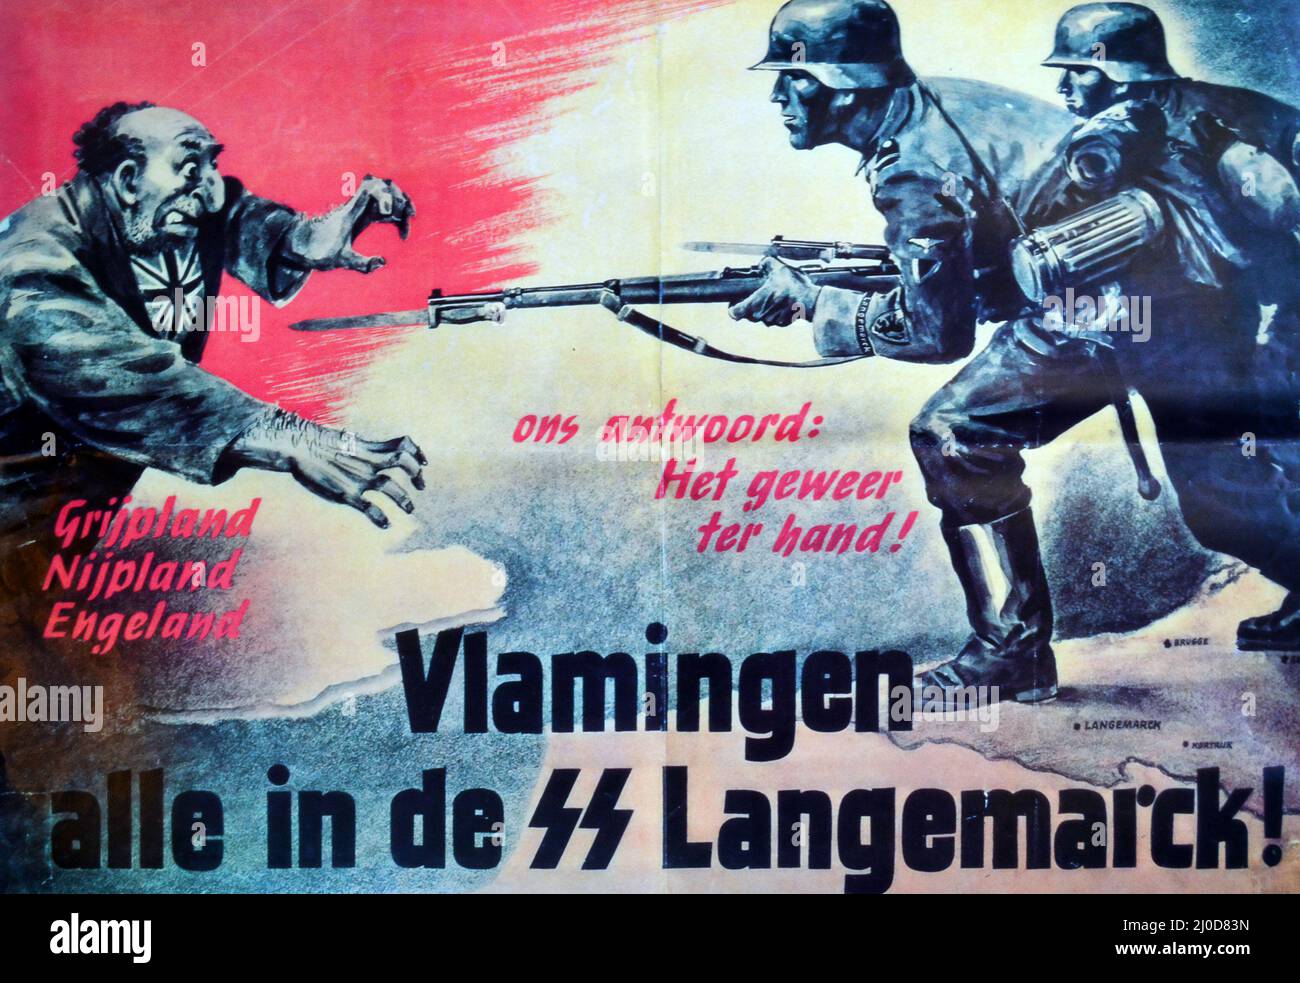 German Nazi propaganda - recruiting poster Of 27th SS Volunteer Division Langemarck with Title: Flemish All in the SS Langemarck Stock Photo